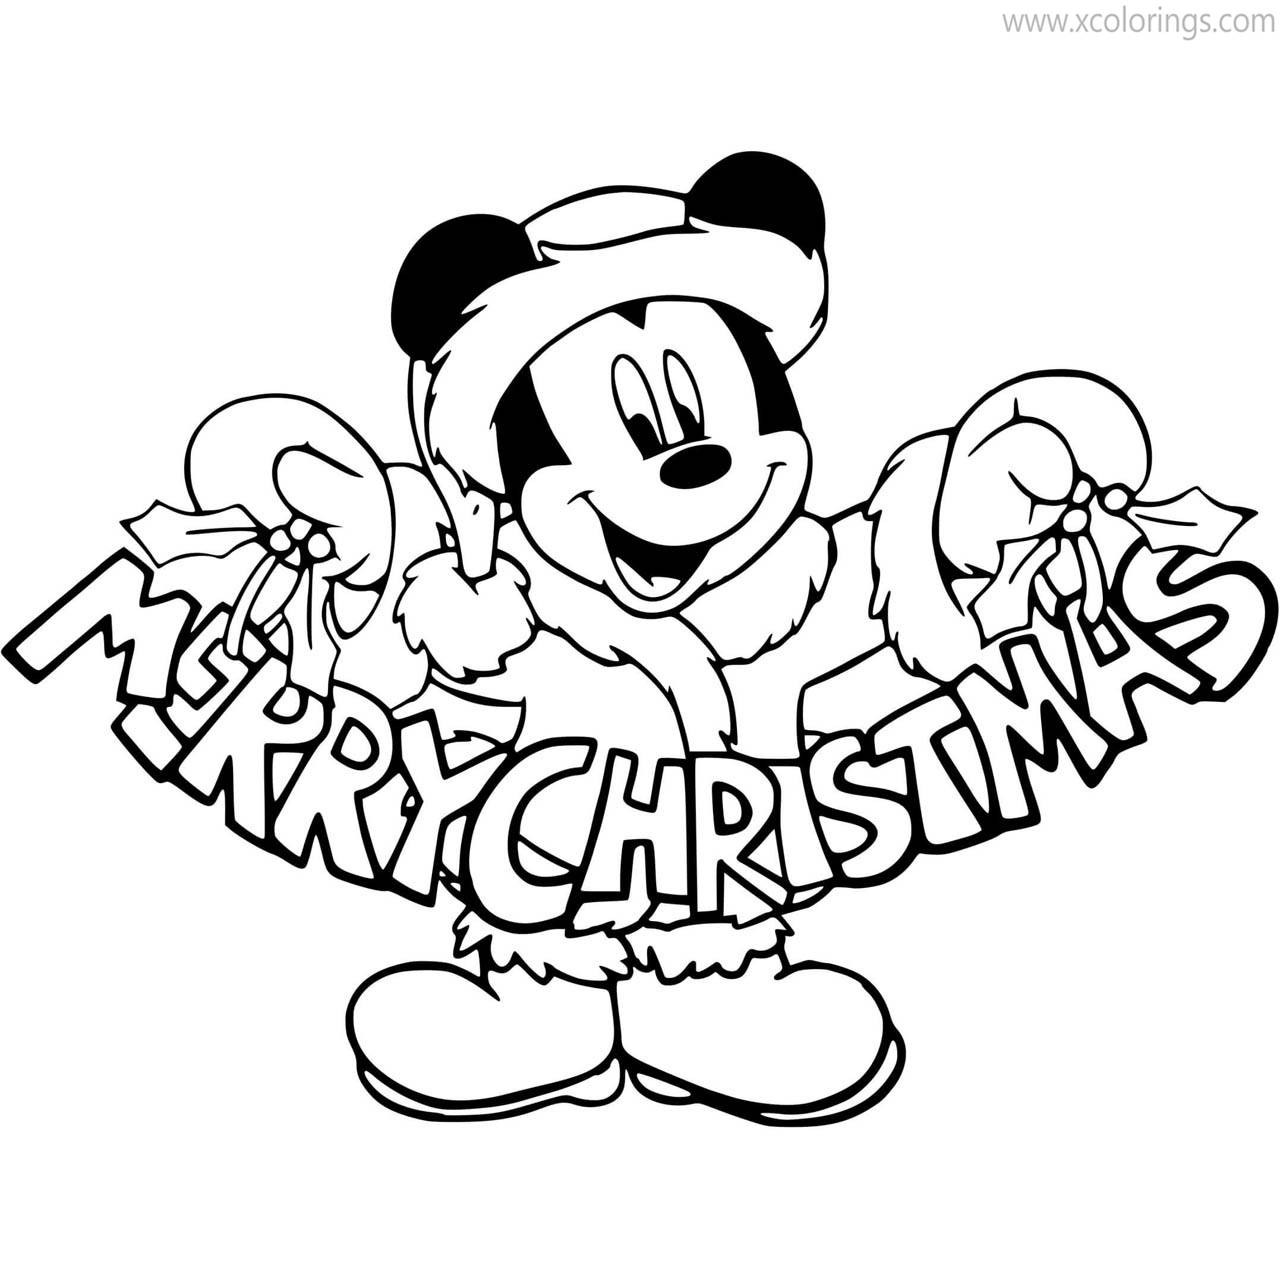 Free Mickey Mouse Merry Christmas Coloring Pages printable